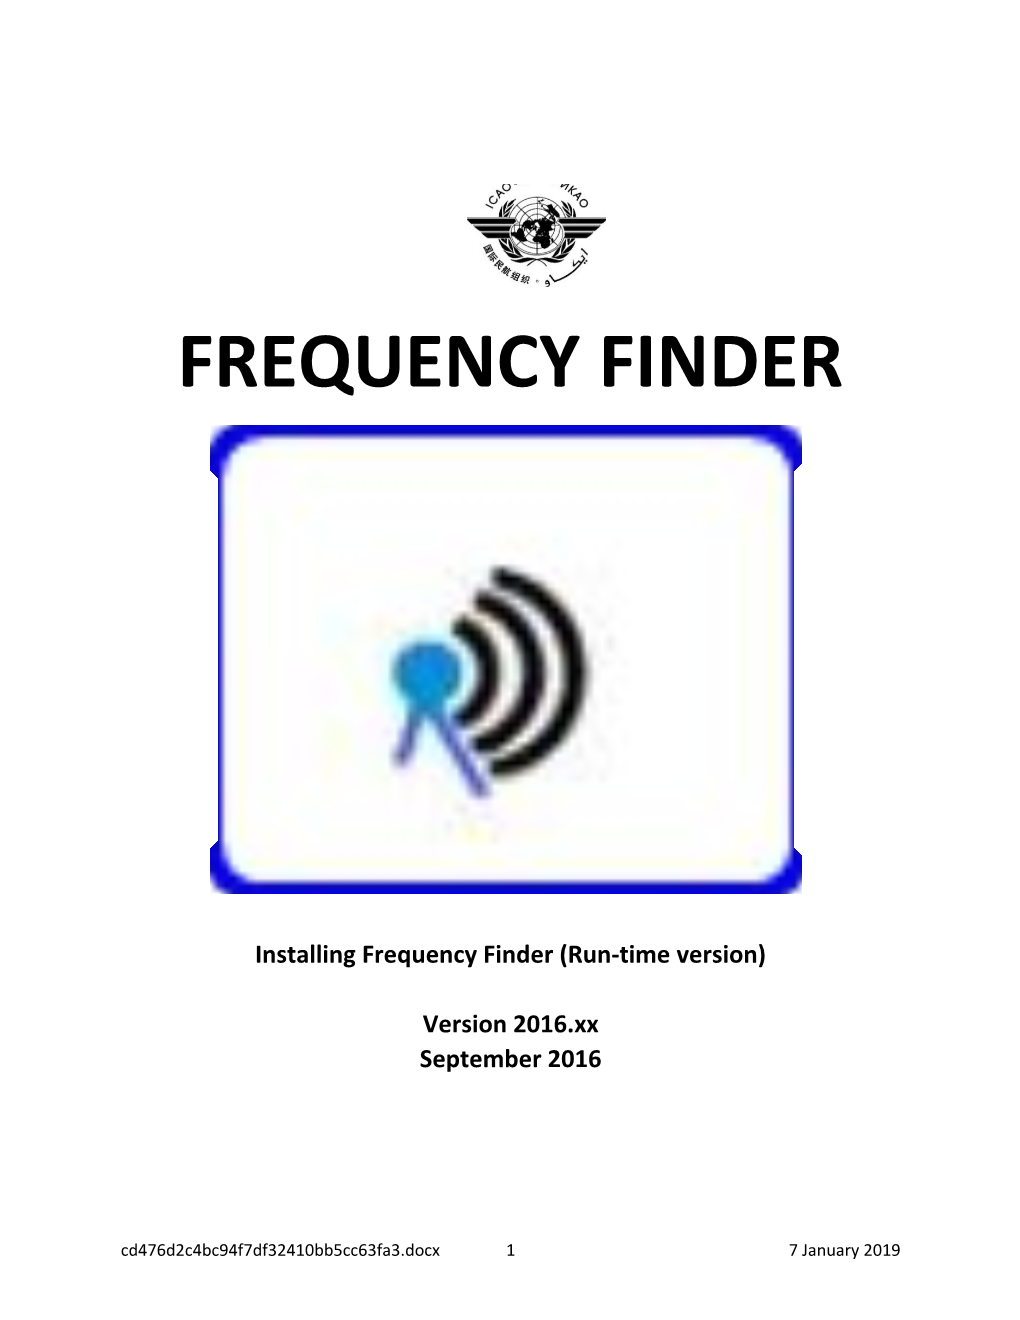 Installing Frequency Finder (Run-Time Version)